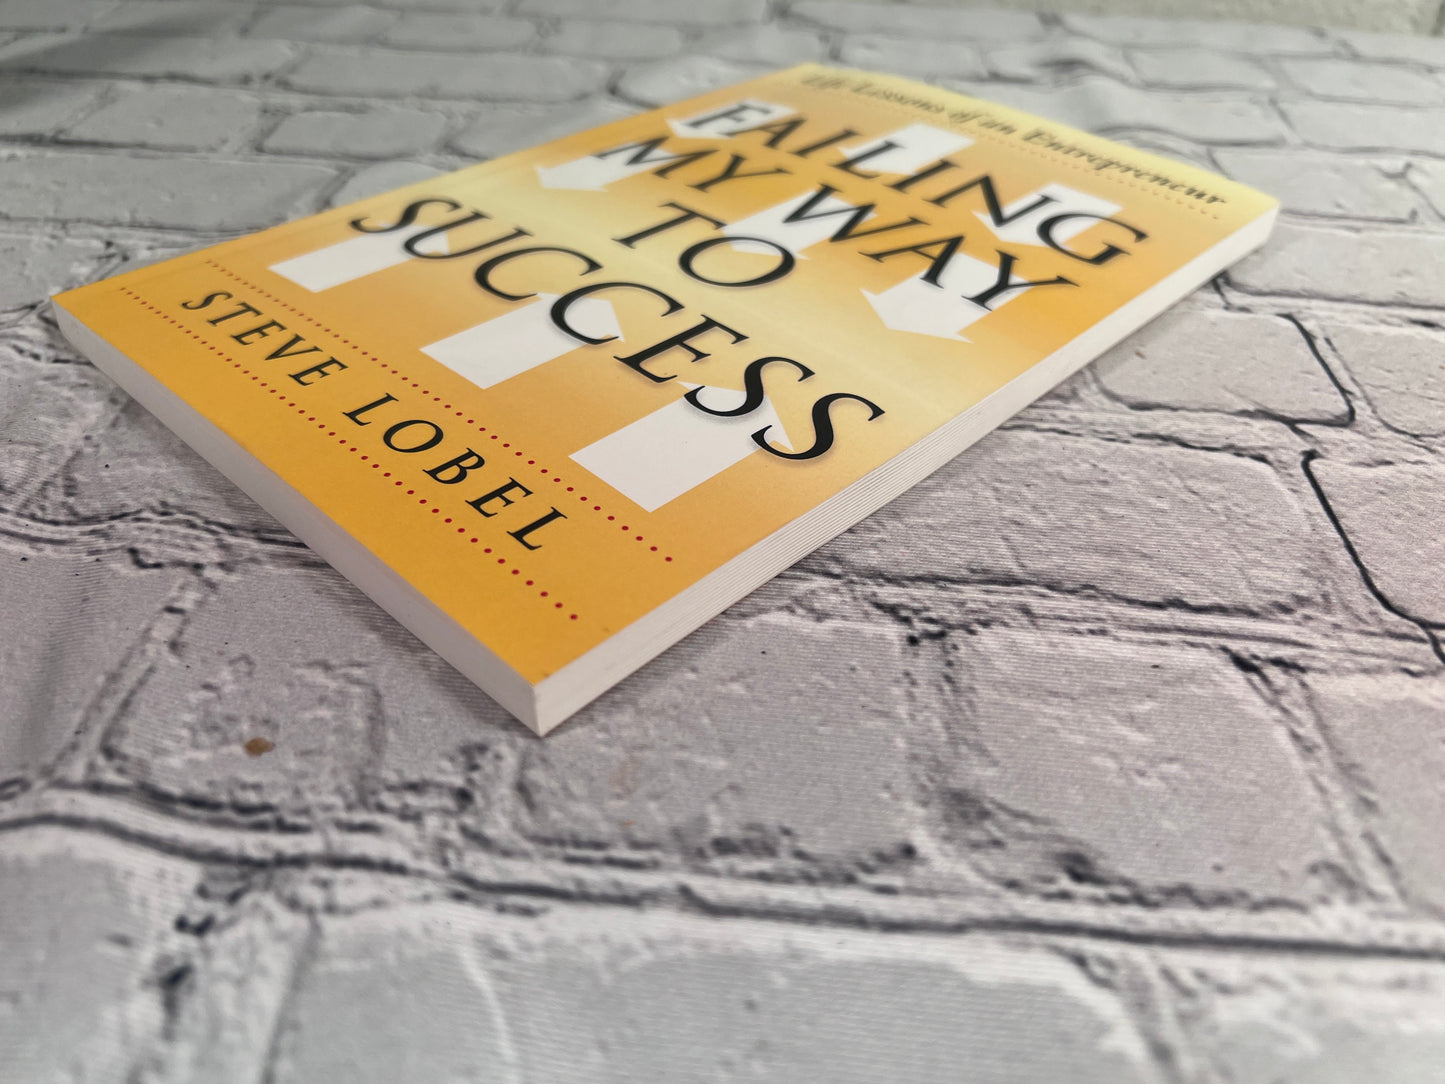 Failing my Way to Success: Life Lessons of an Entrepreneur by Lobel [2015 · SIGNED]